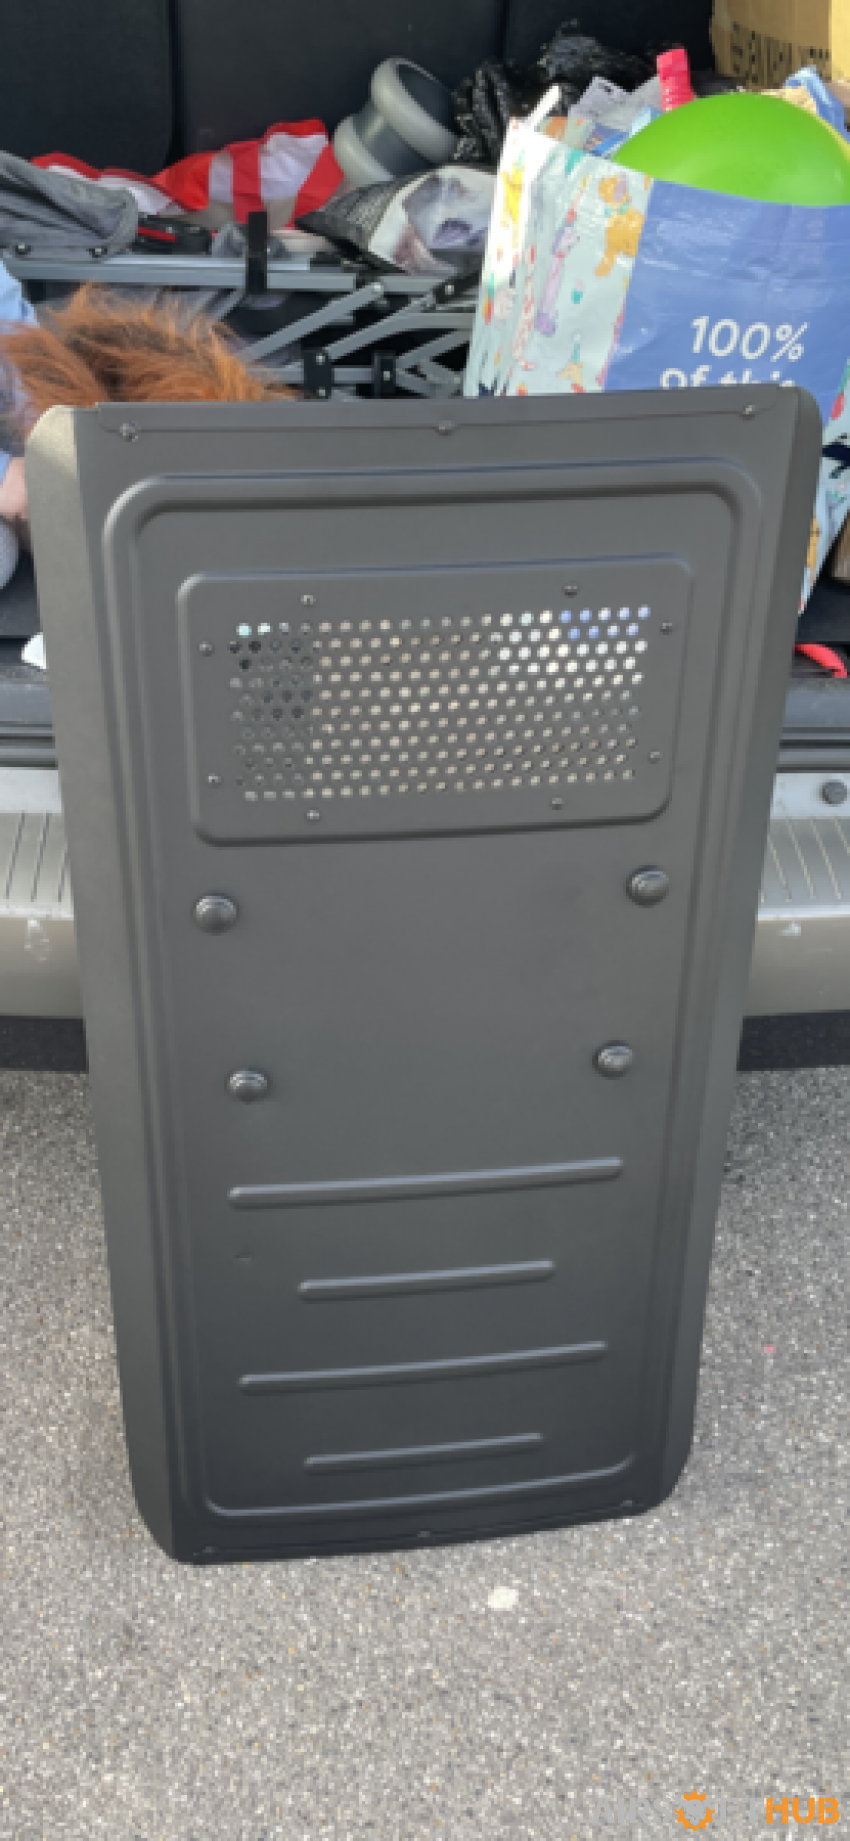 Riot shield - Used airsoft equipment